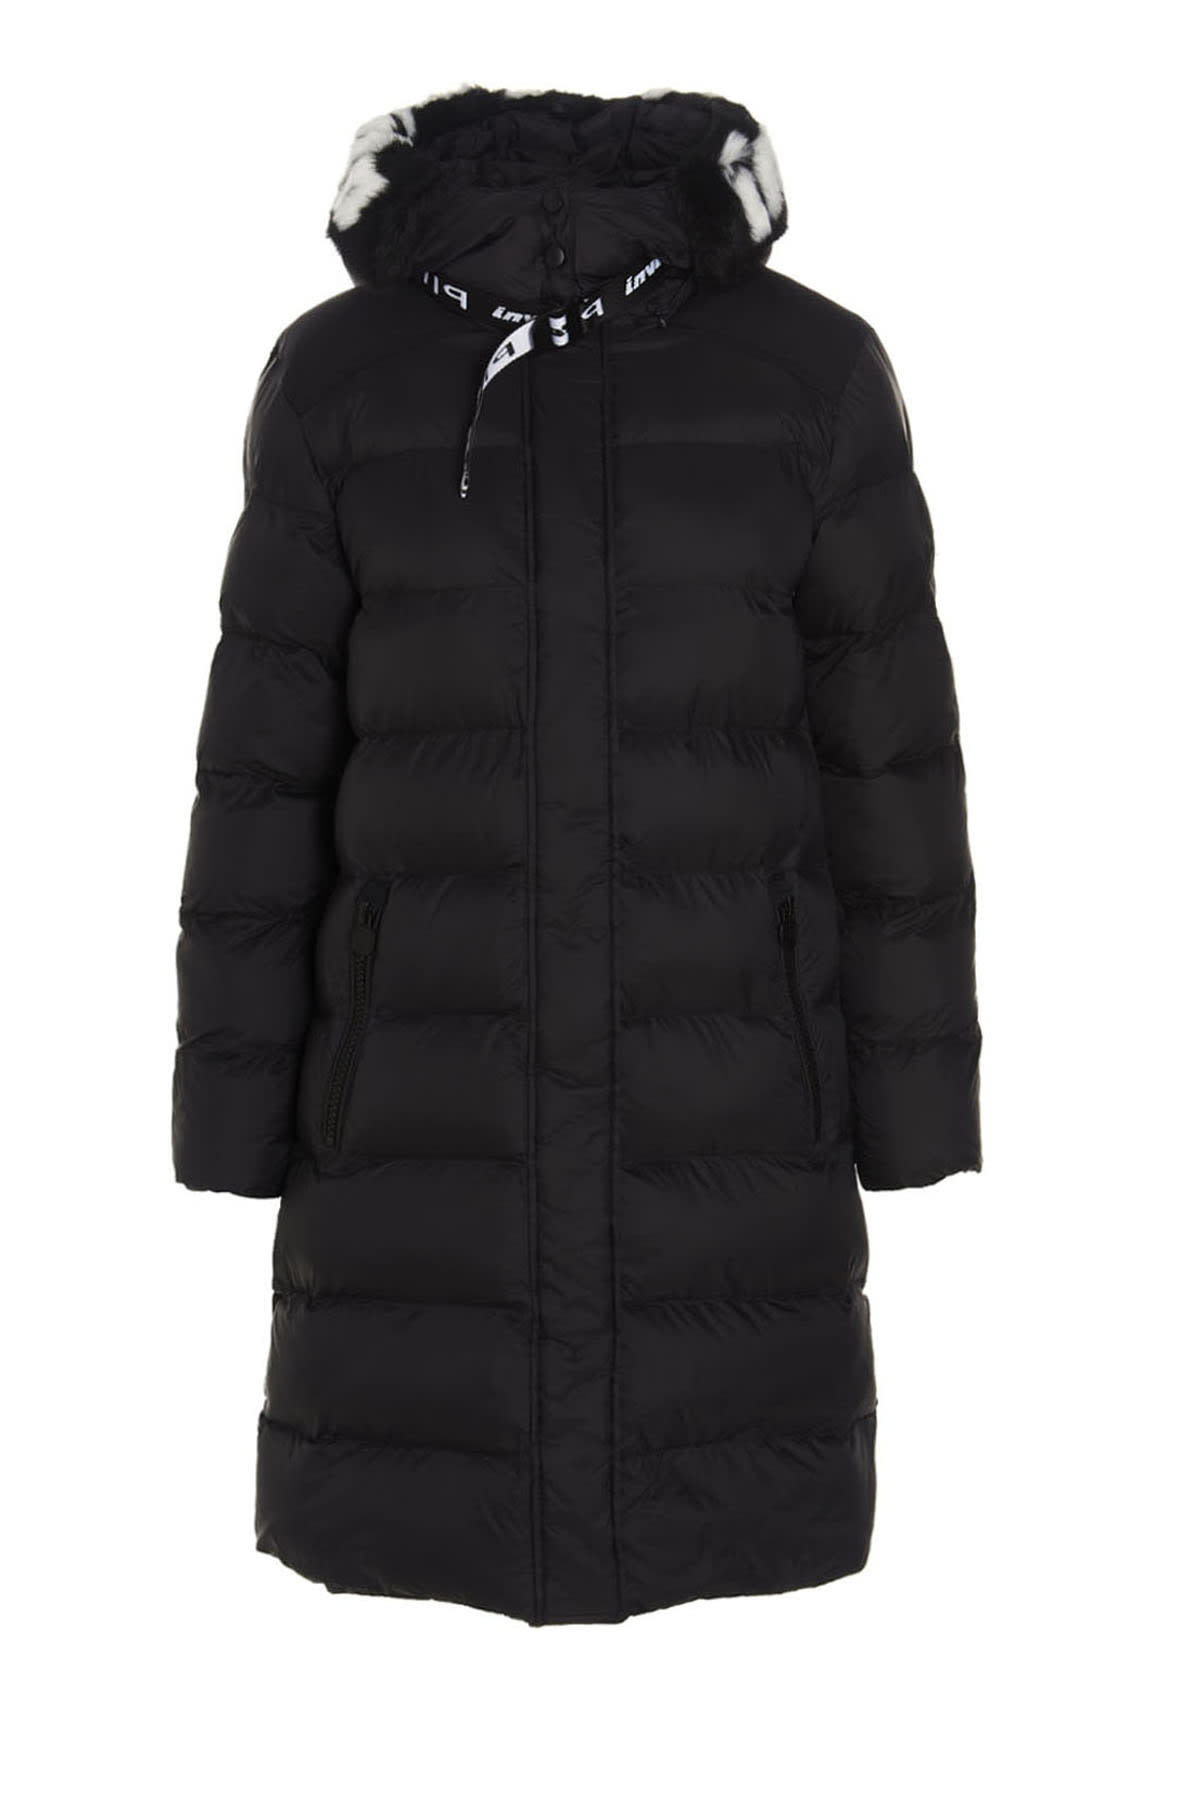 Pinko iperbolico Puffer Jacket In Collab. With Invicta